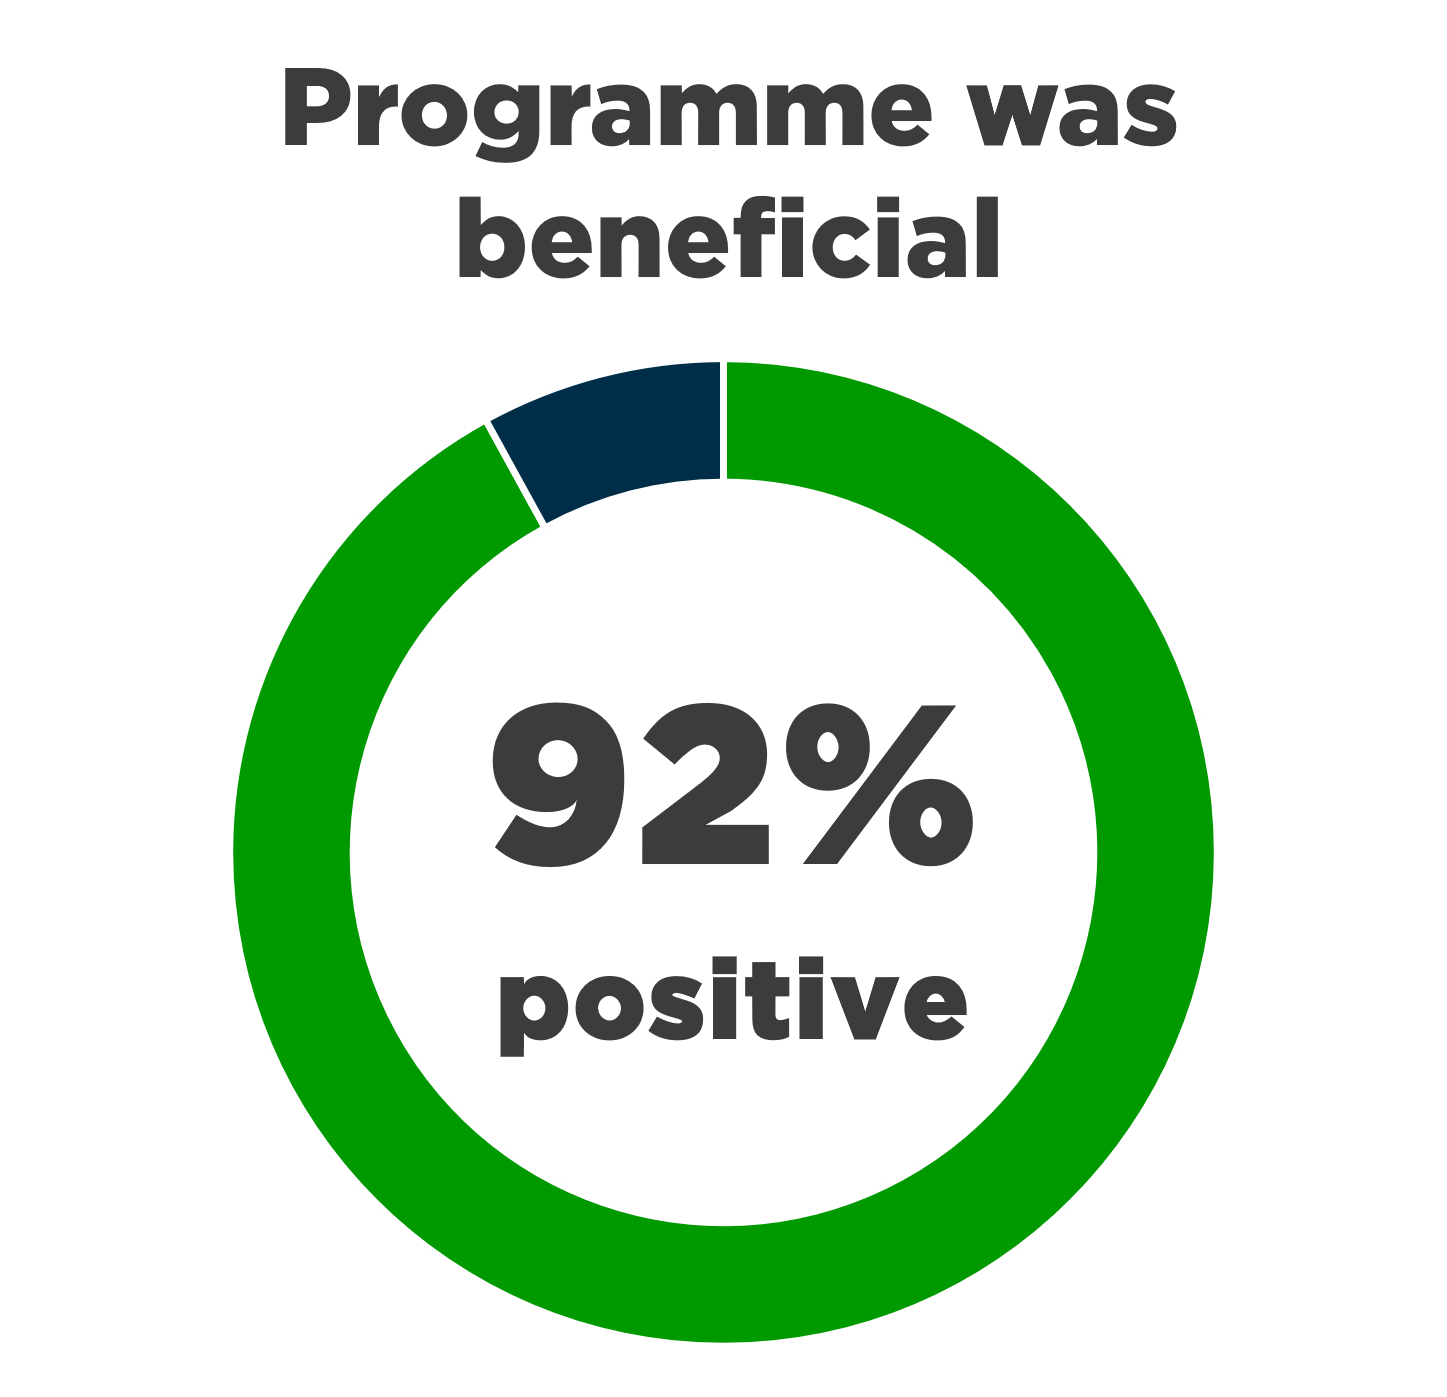 The title 'Programme was beneficial' above a ring coloured 92% green and 8% navy blue. '92% positive' reads inside the ring.